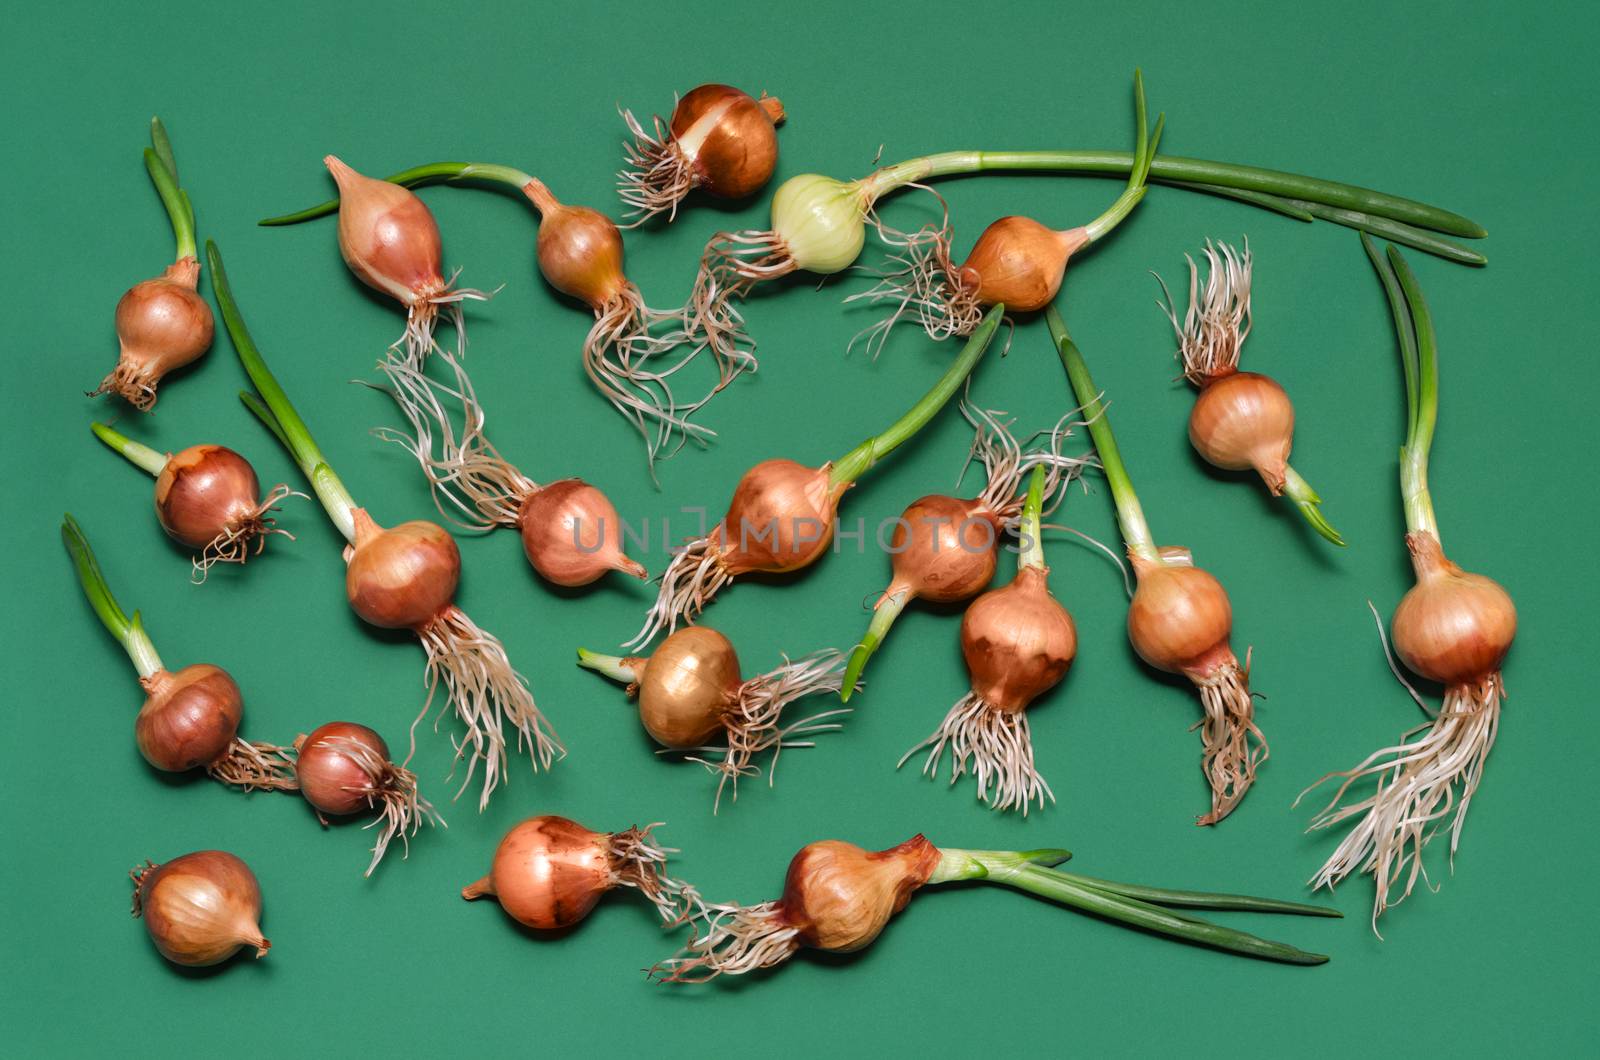 Small sprouted onion bulbs, lay on a green background.